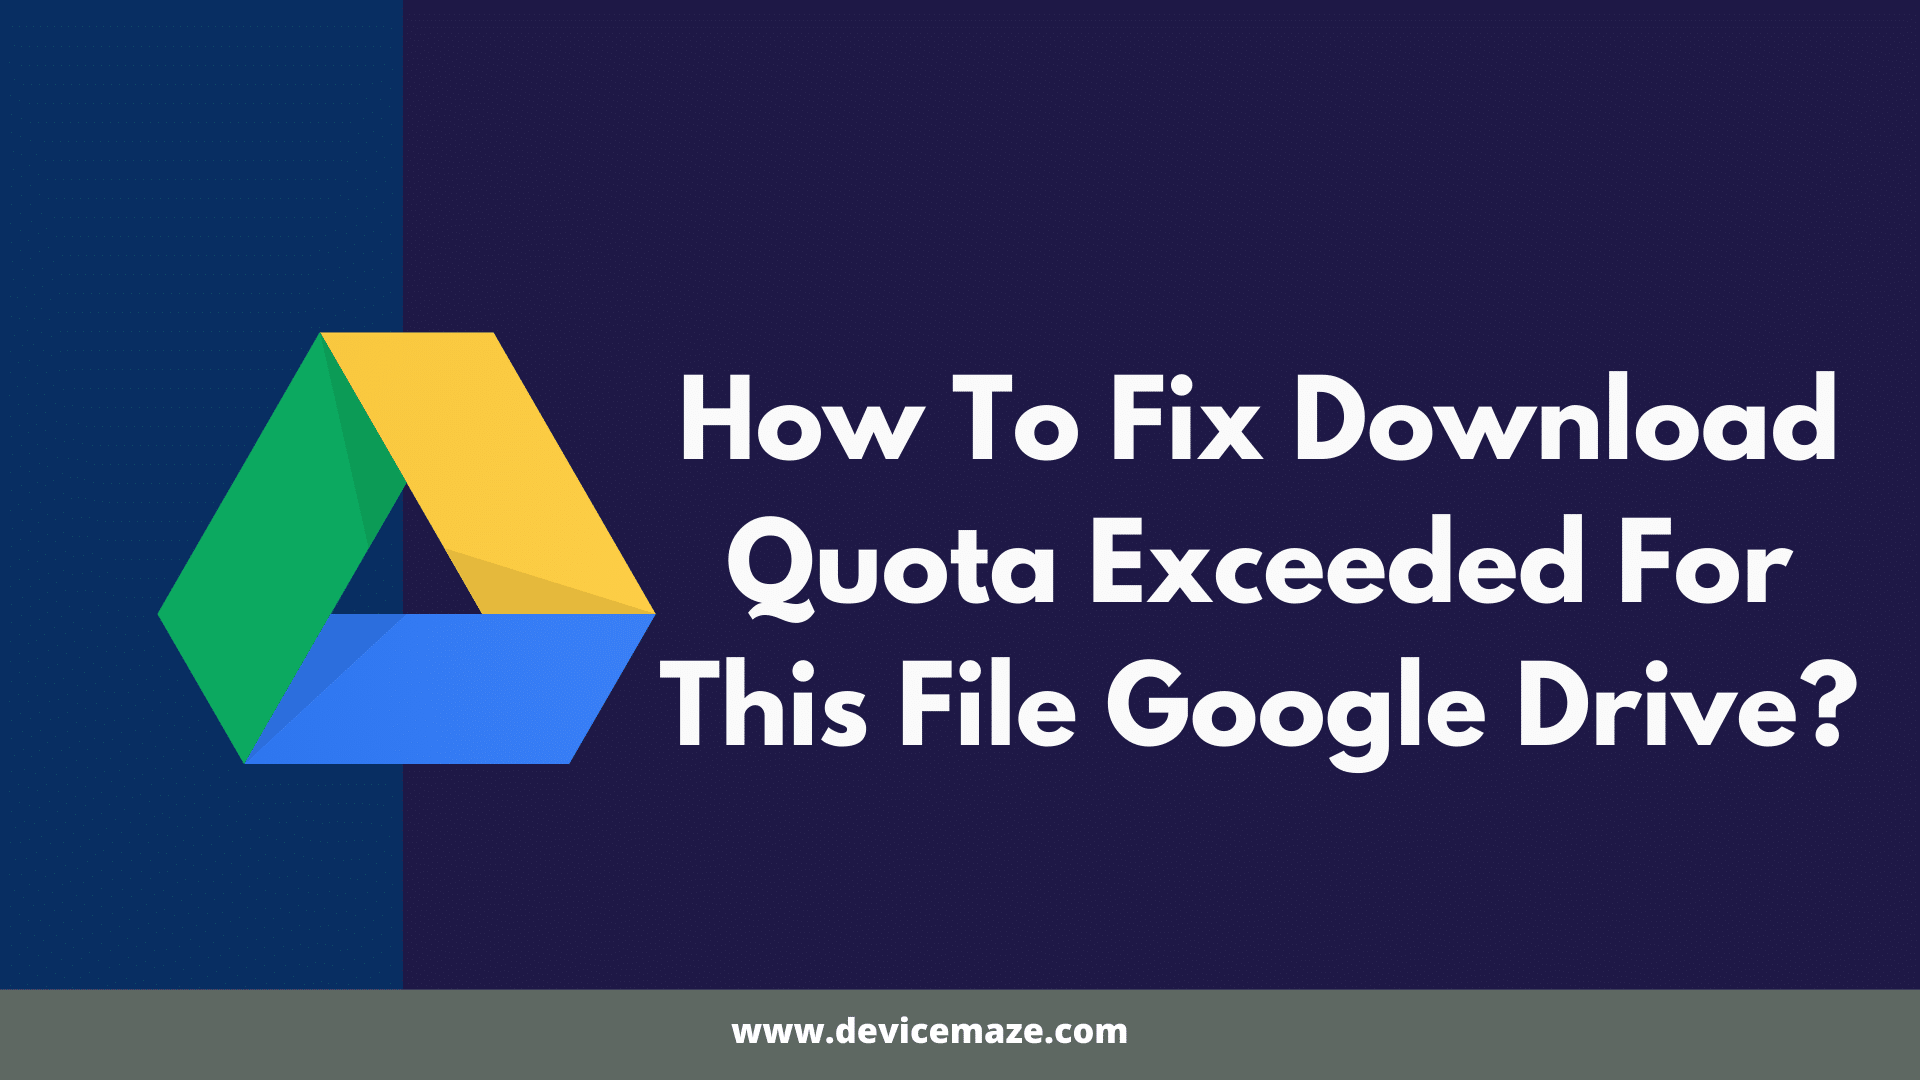 Download Quota Exceeded For This File Google Drive